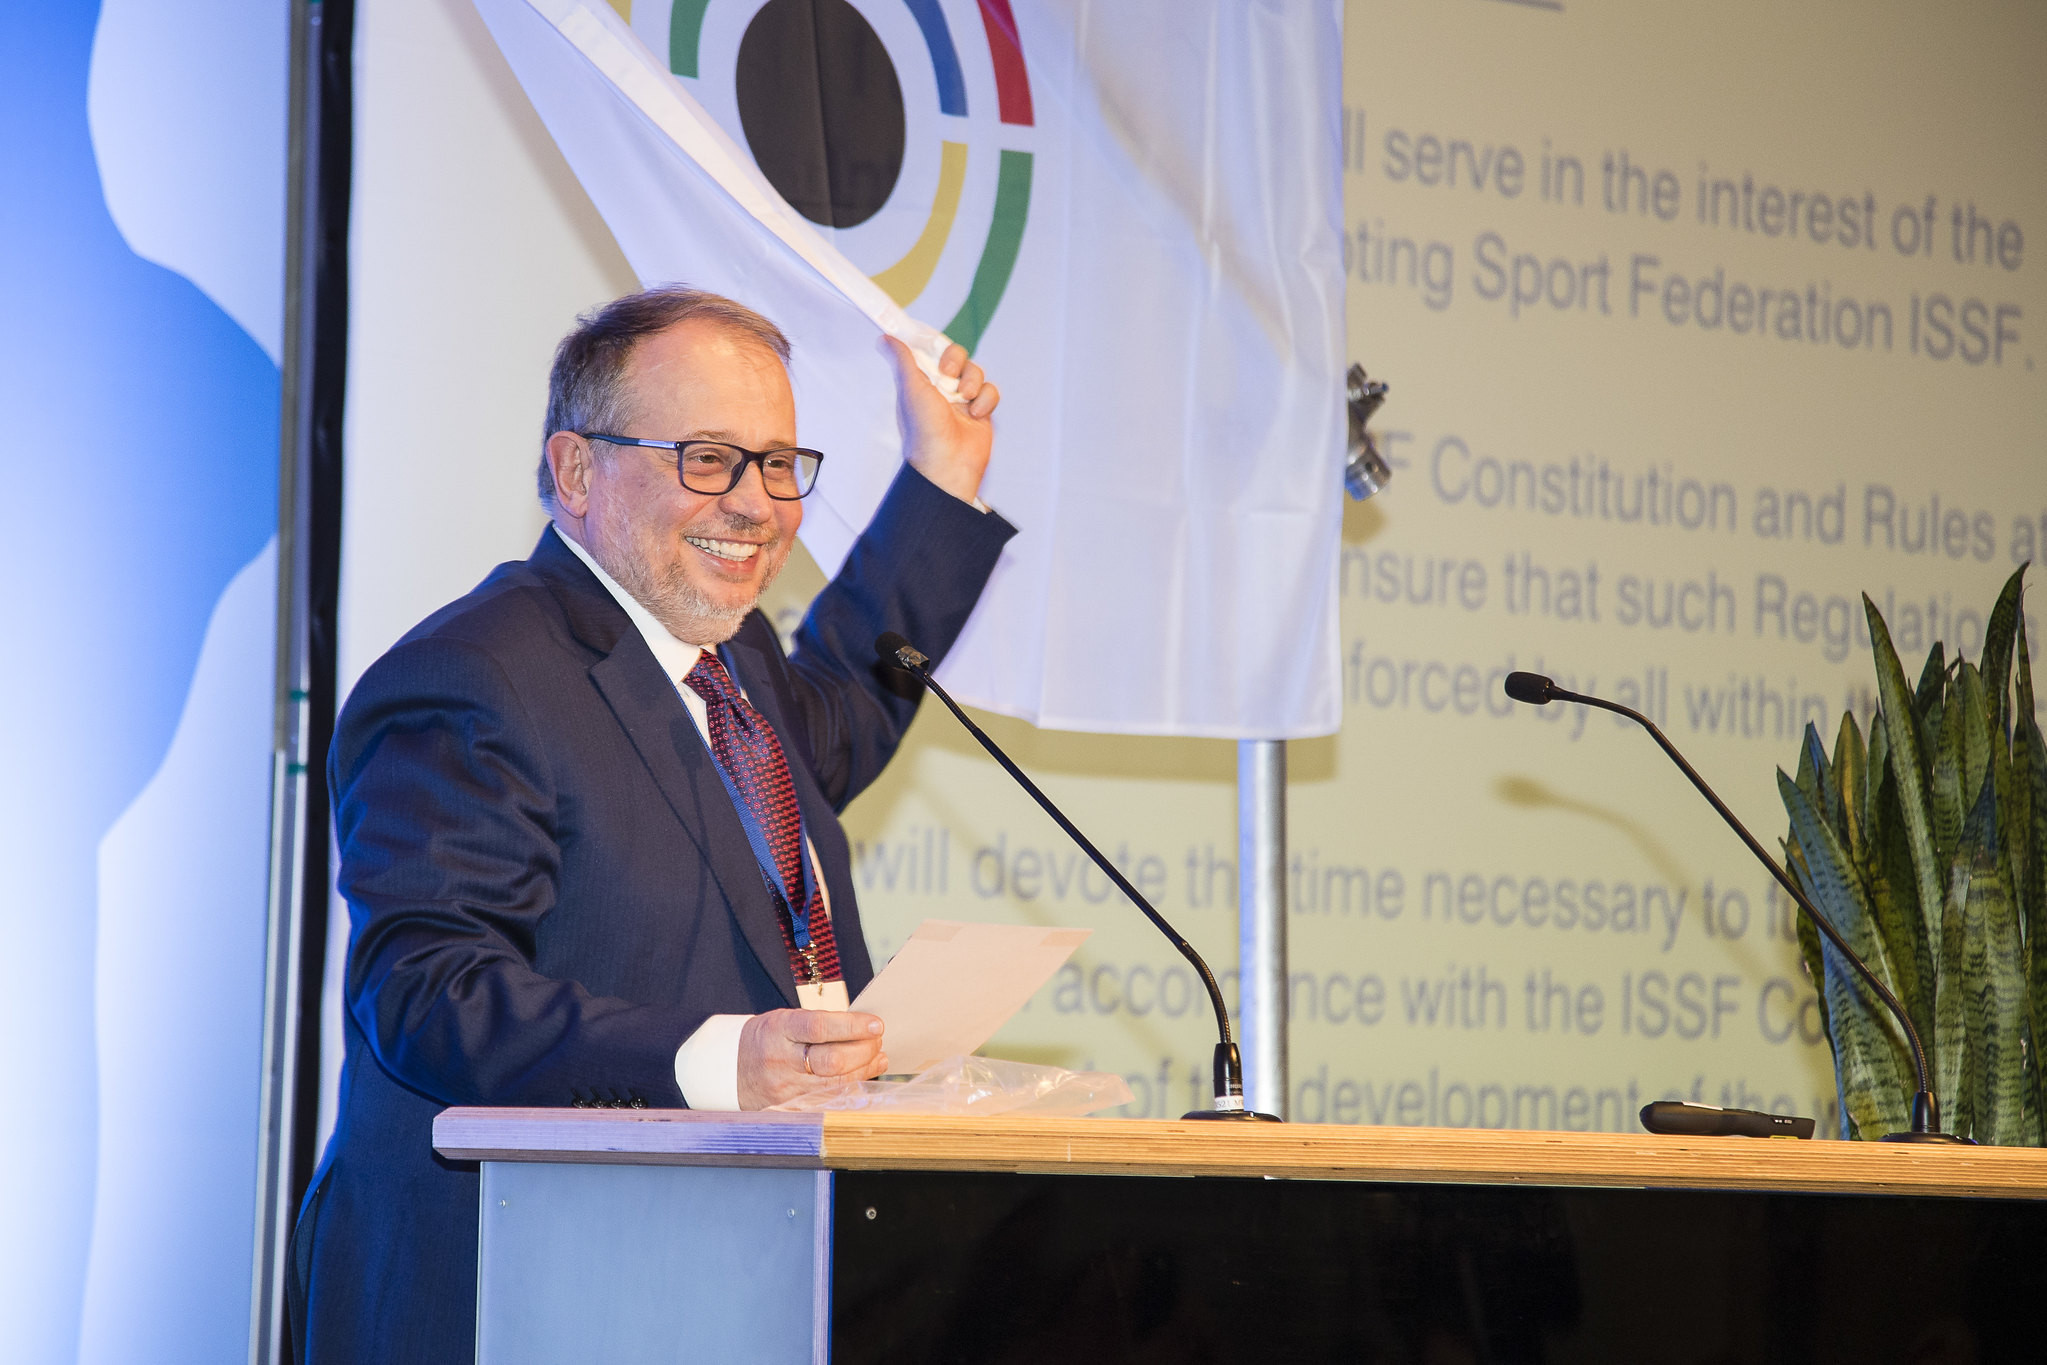 Billionaire Vladimir Lisin had led the Russian Shooting Union since 2002 but has stepped down to concentrate on heading the International Shooting Federation ©ESC